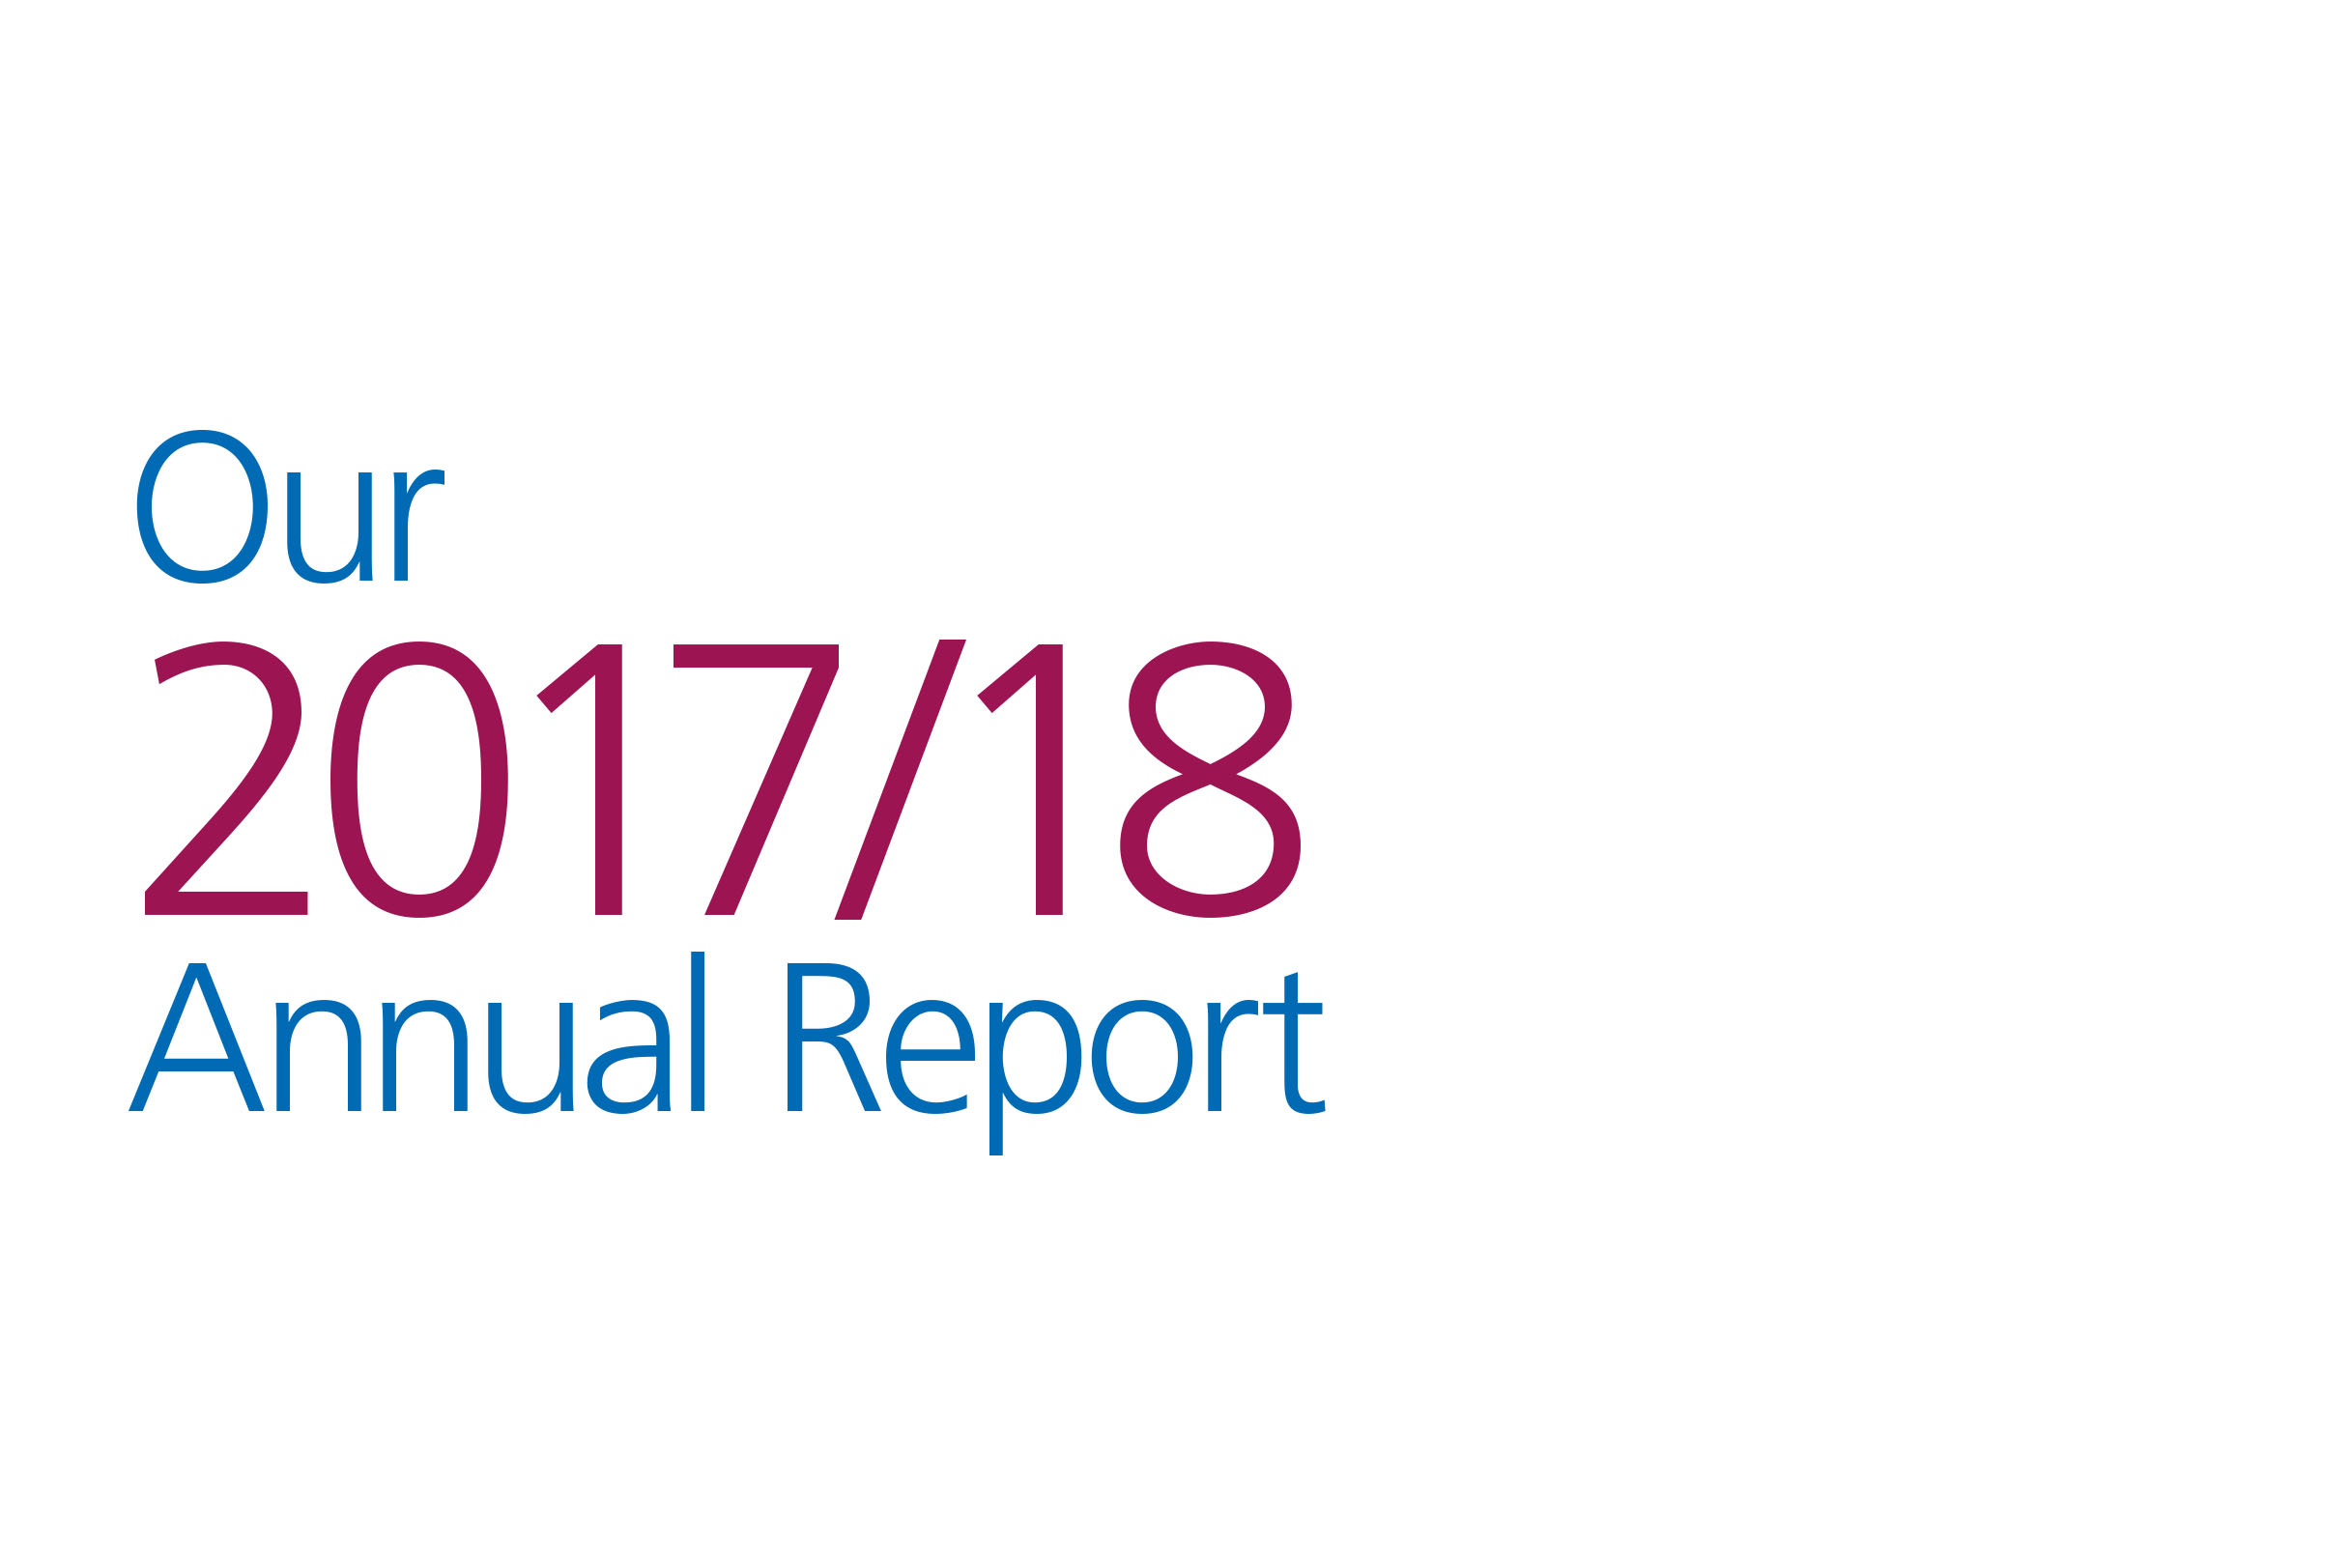 NHS England 2017/18 Annual Report